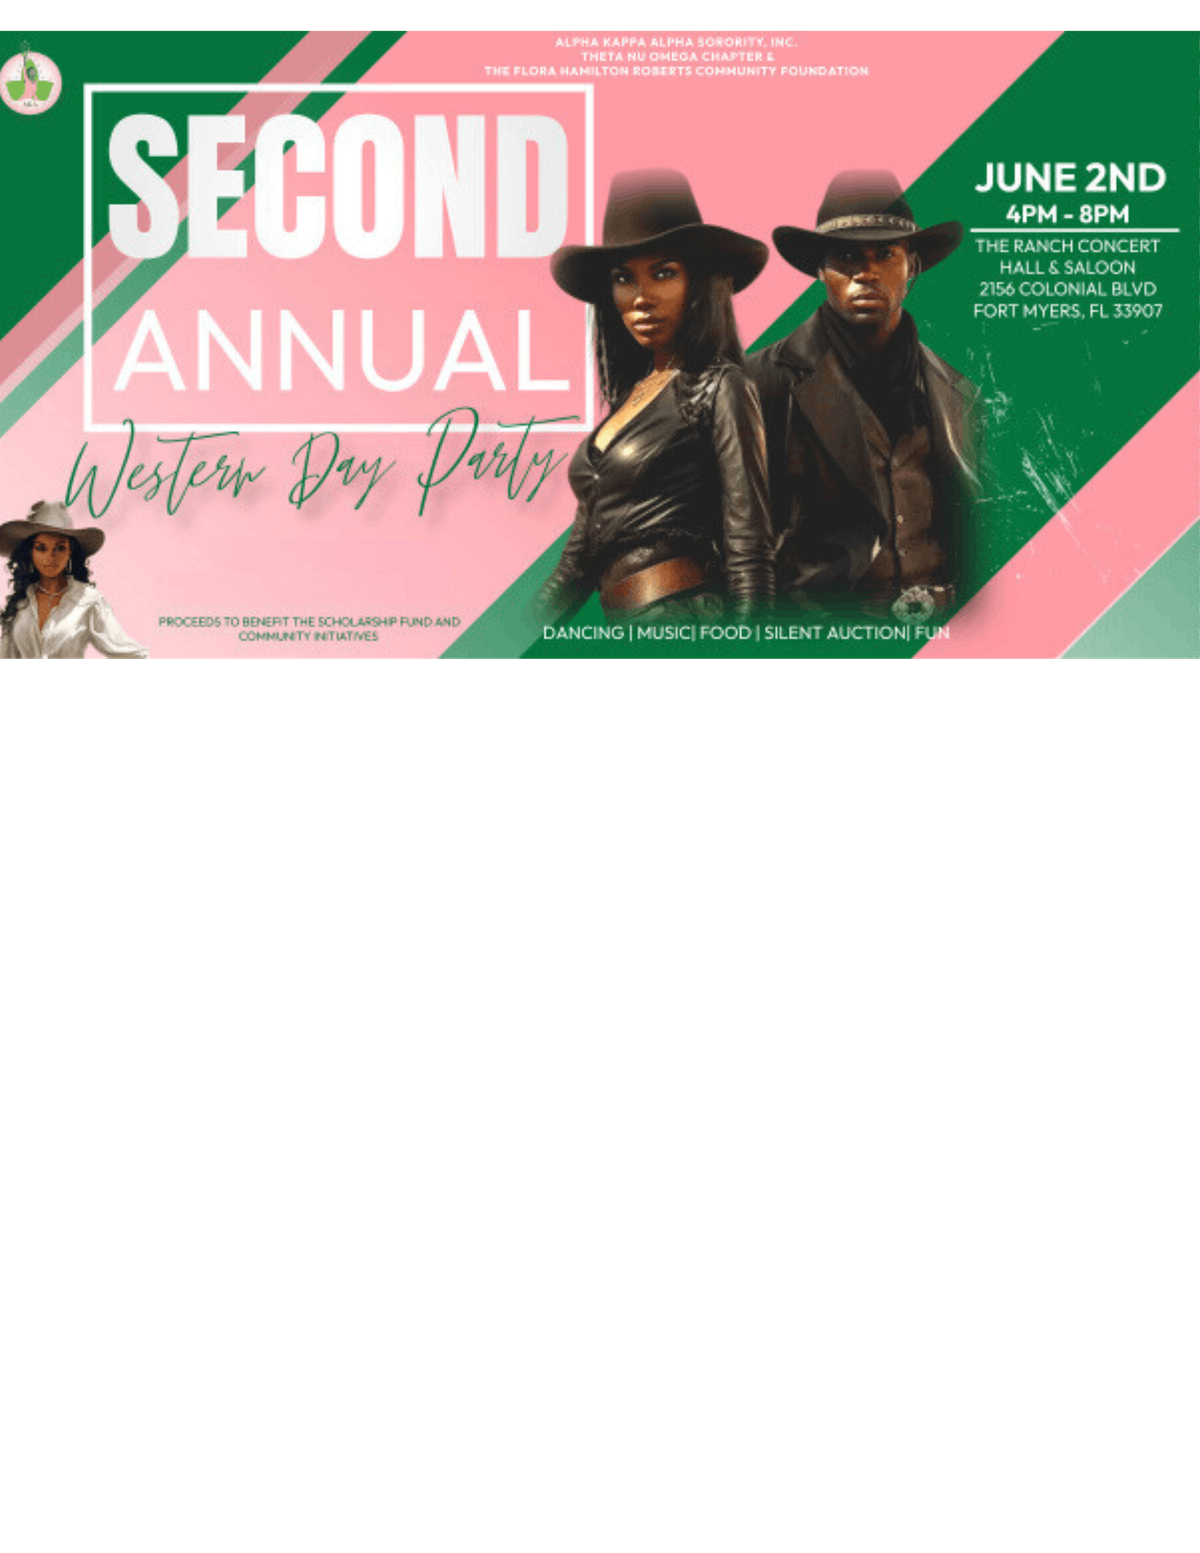 Theta Nu Omega's 2nd Annual Western Day Party